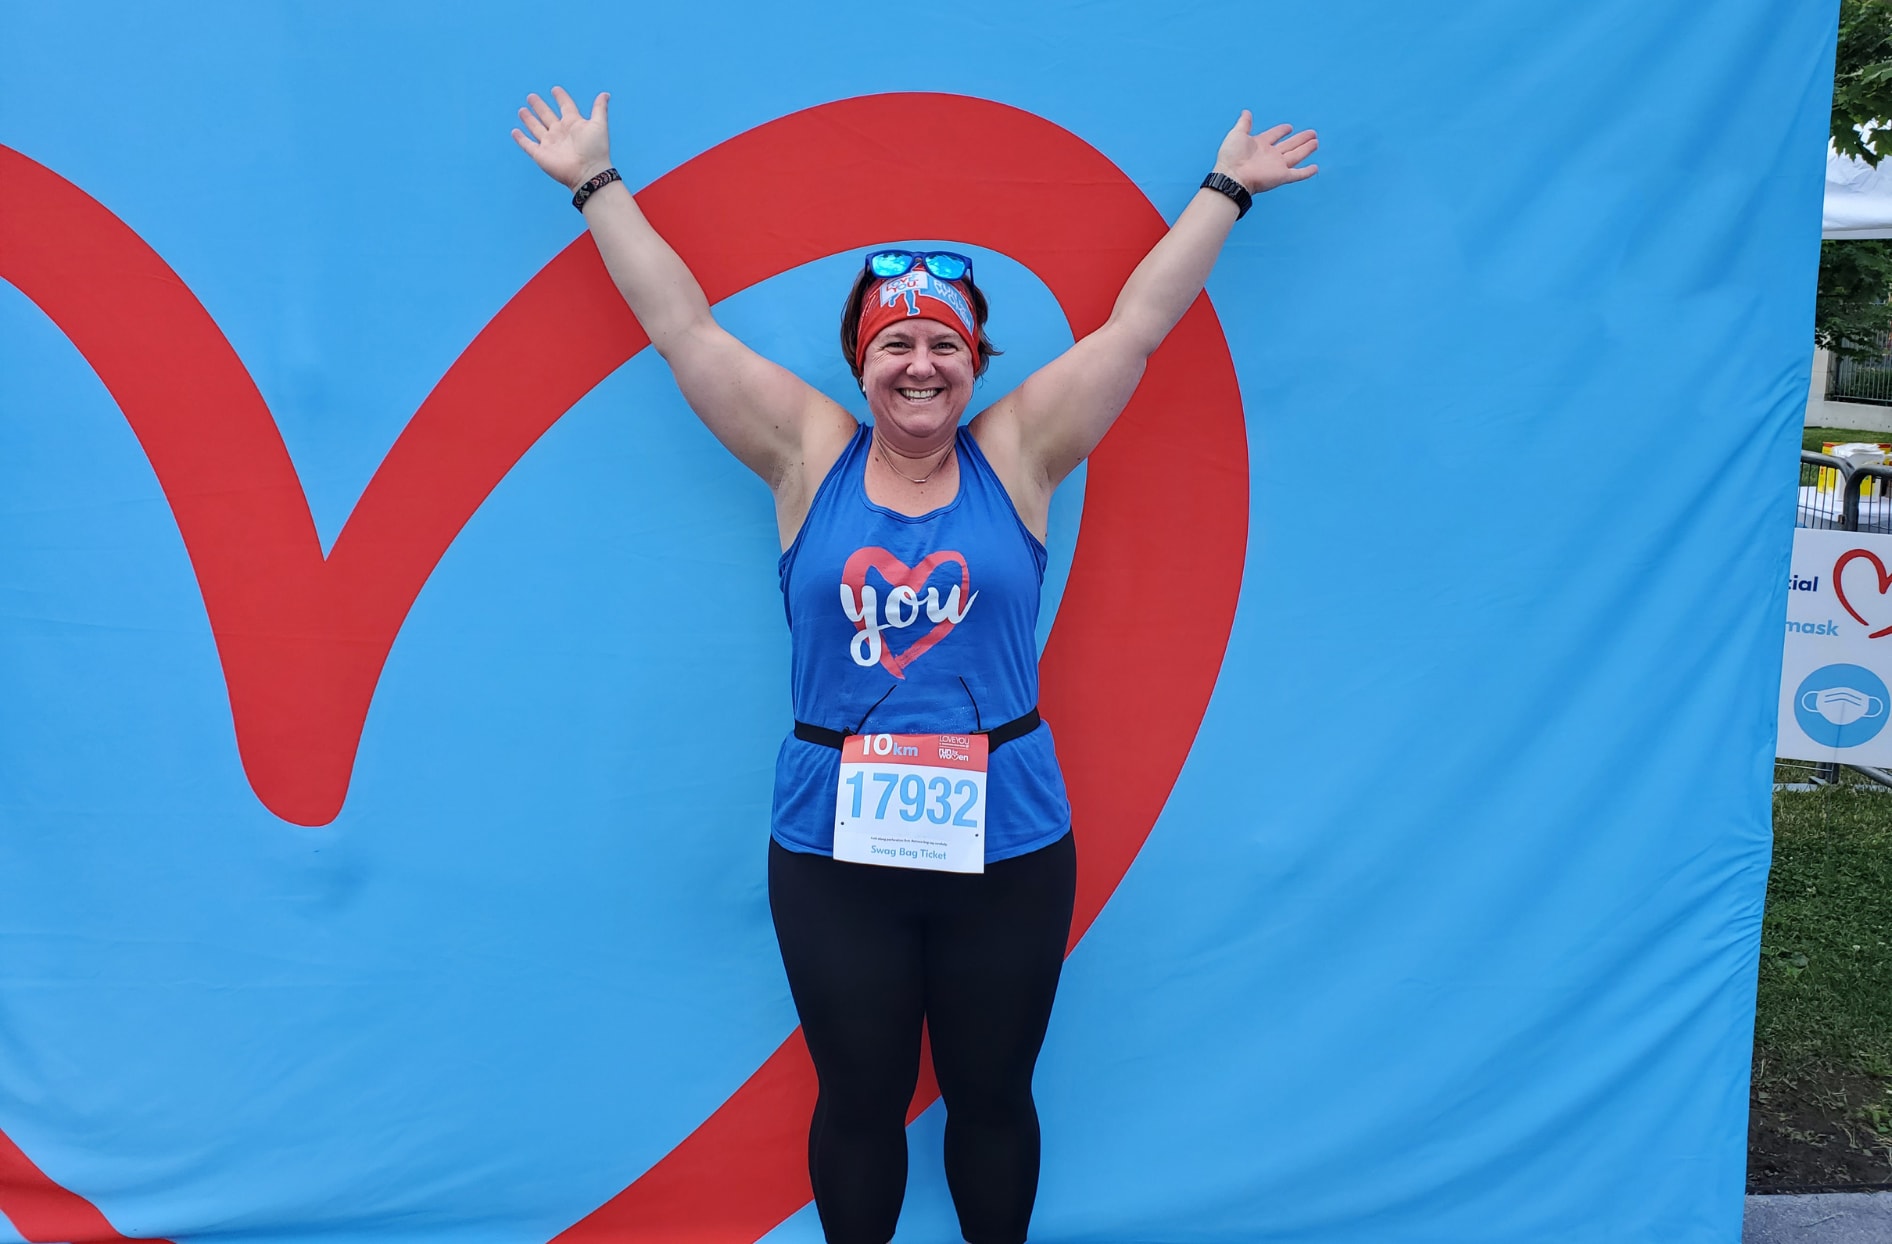 Jessica stands with her arms up in the air celebrating participating in a Run for Women event.  